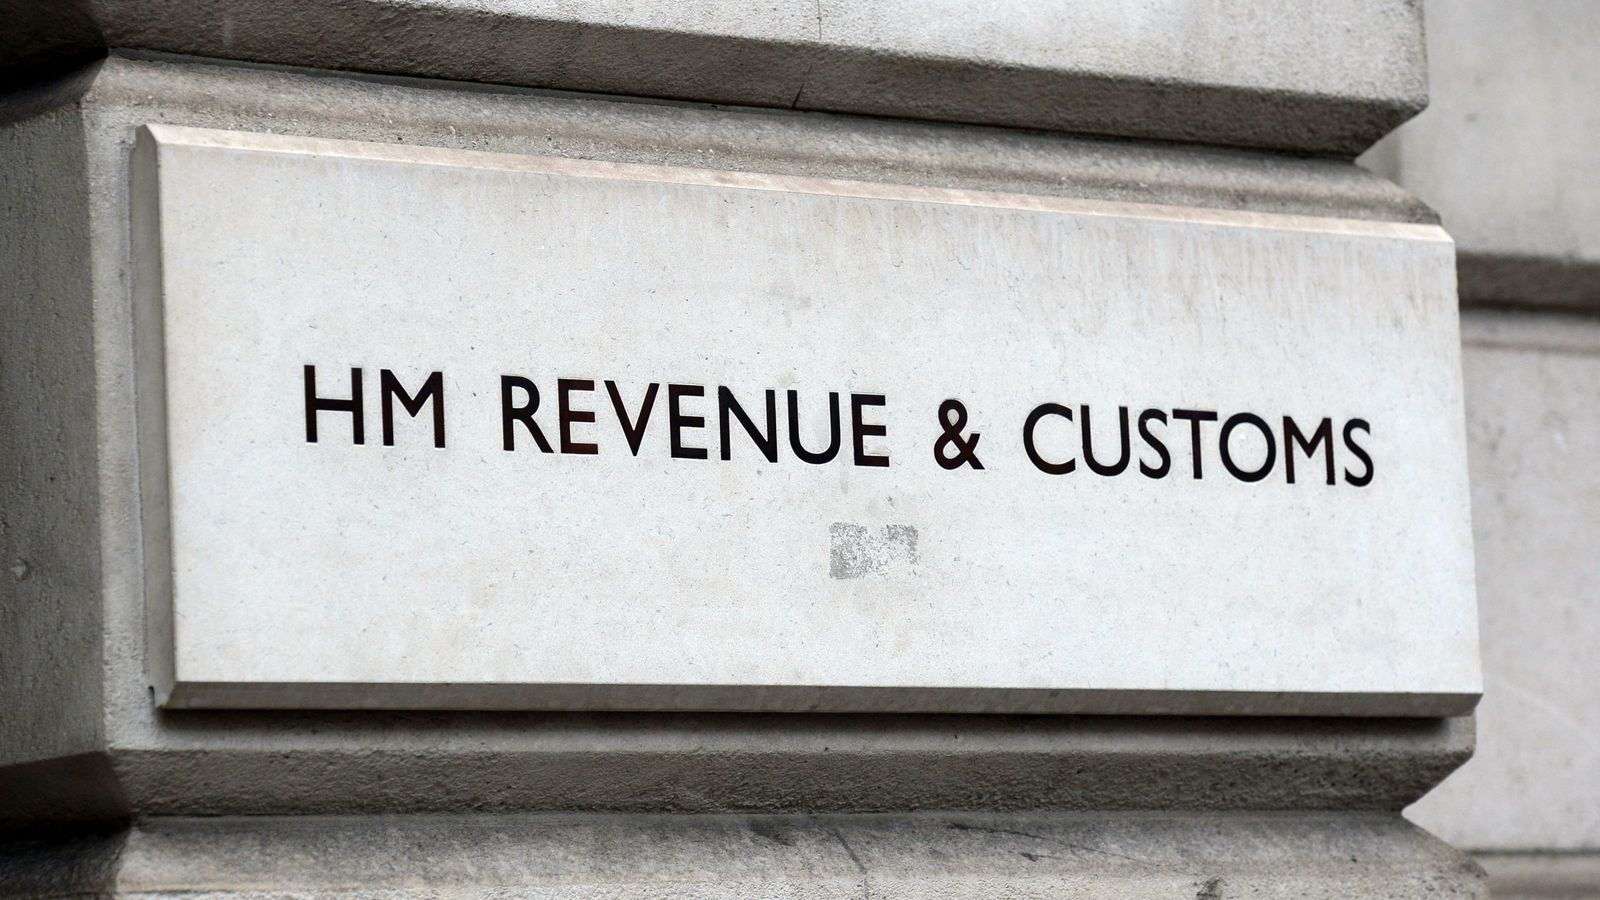 HMRC officials seize NFT crypto assets as three arrested on suspicion fraud